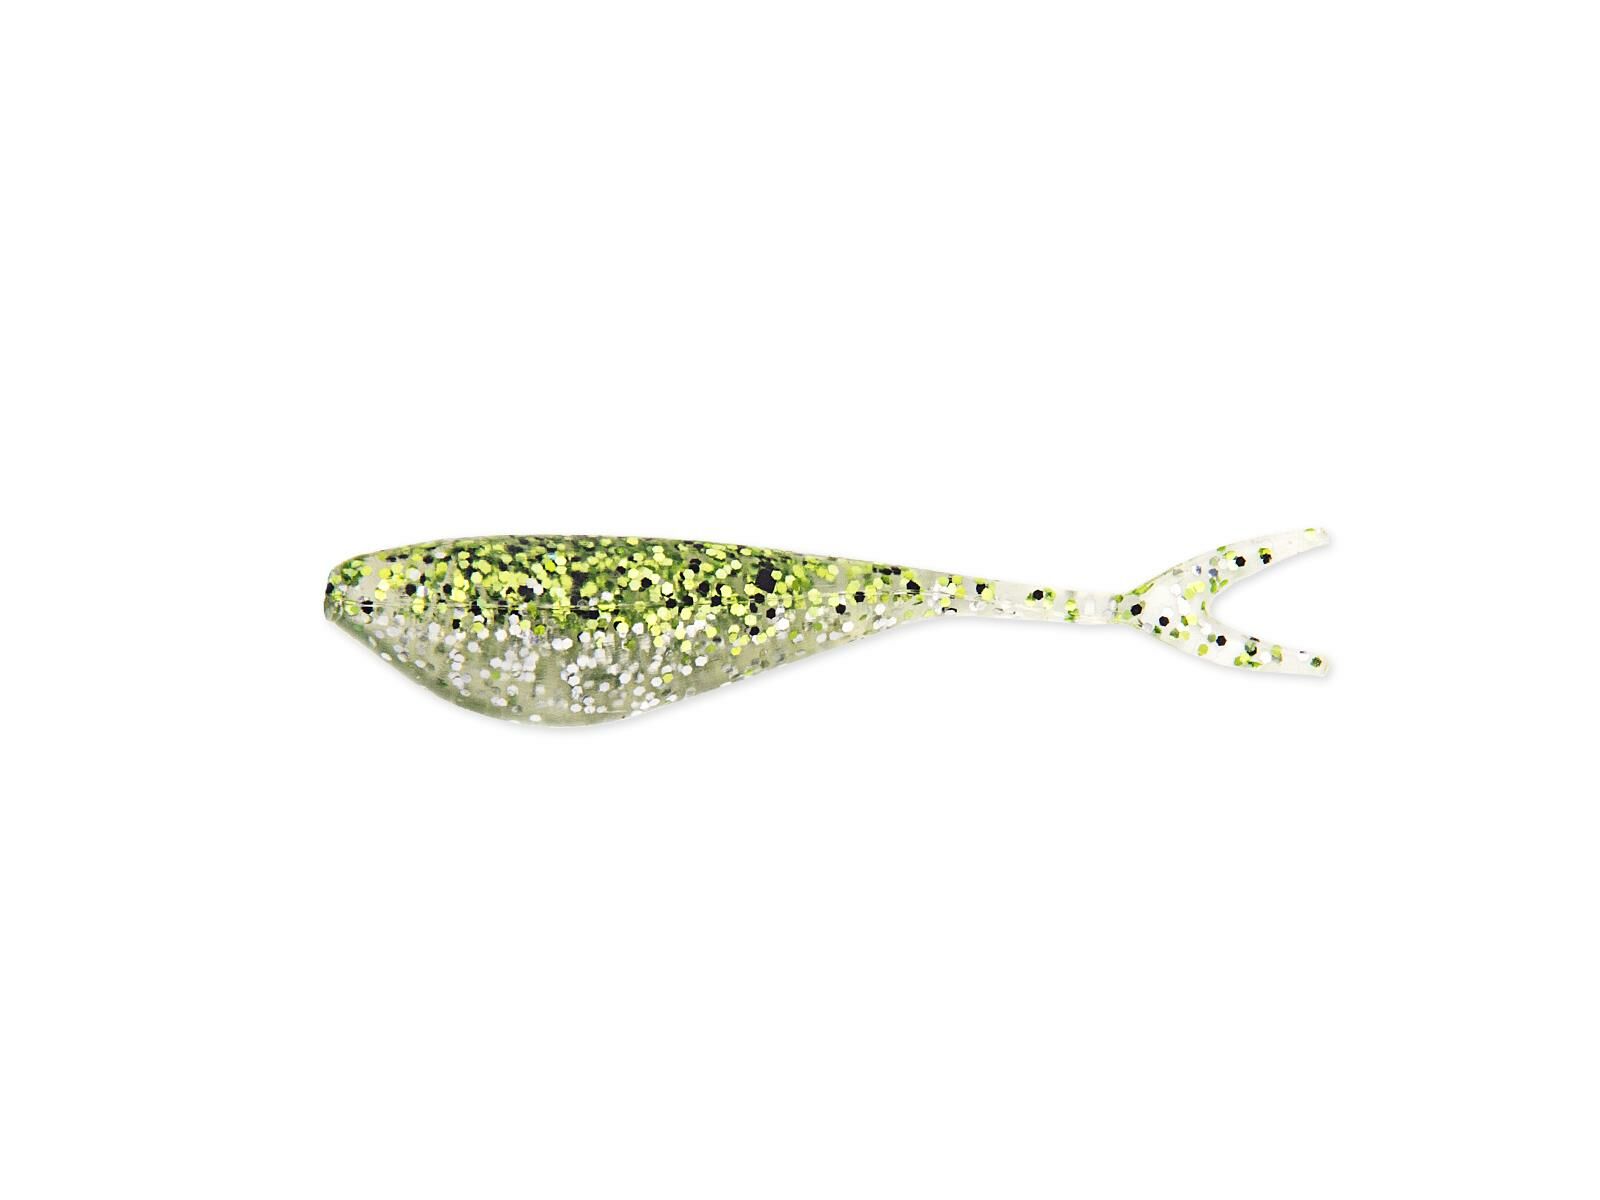 1.75" Fin-S SHAD - Chartreuse Ice